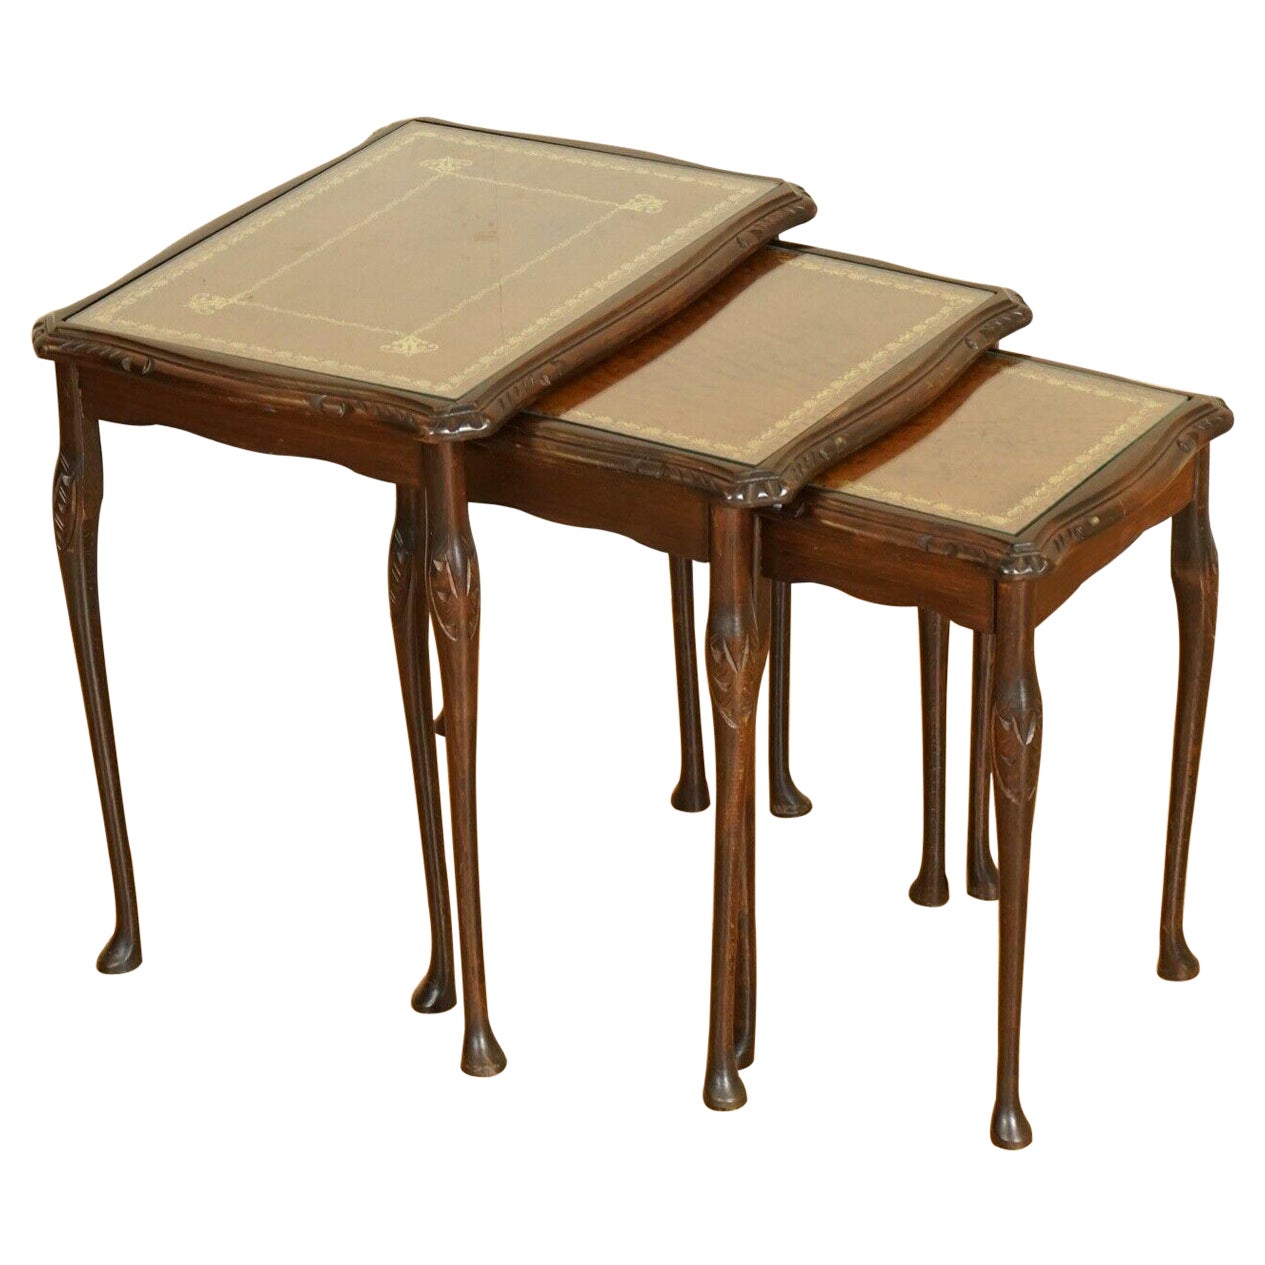 Hardwood Nest of Tables Queen Anne Style Legs with Brown Embossed Leather Top